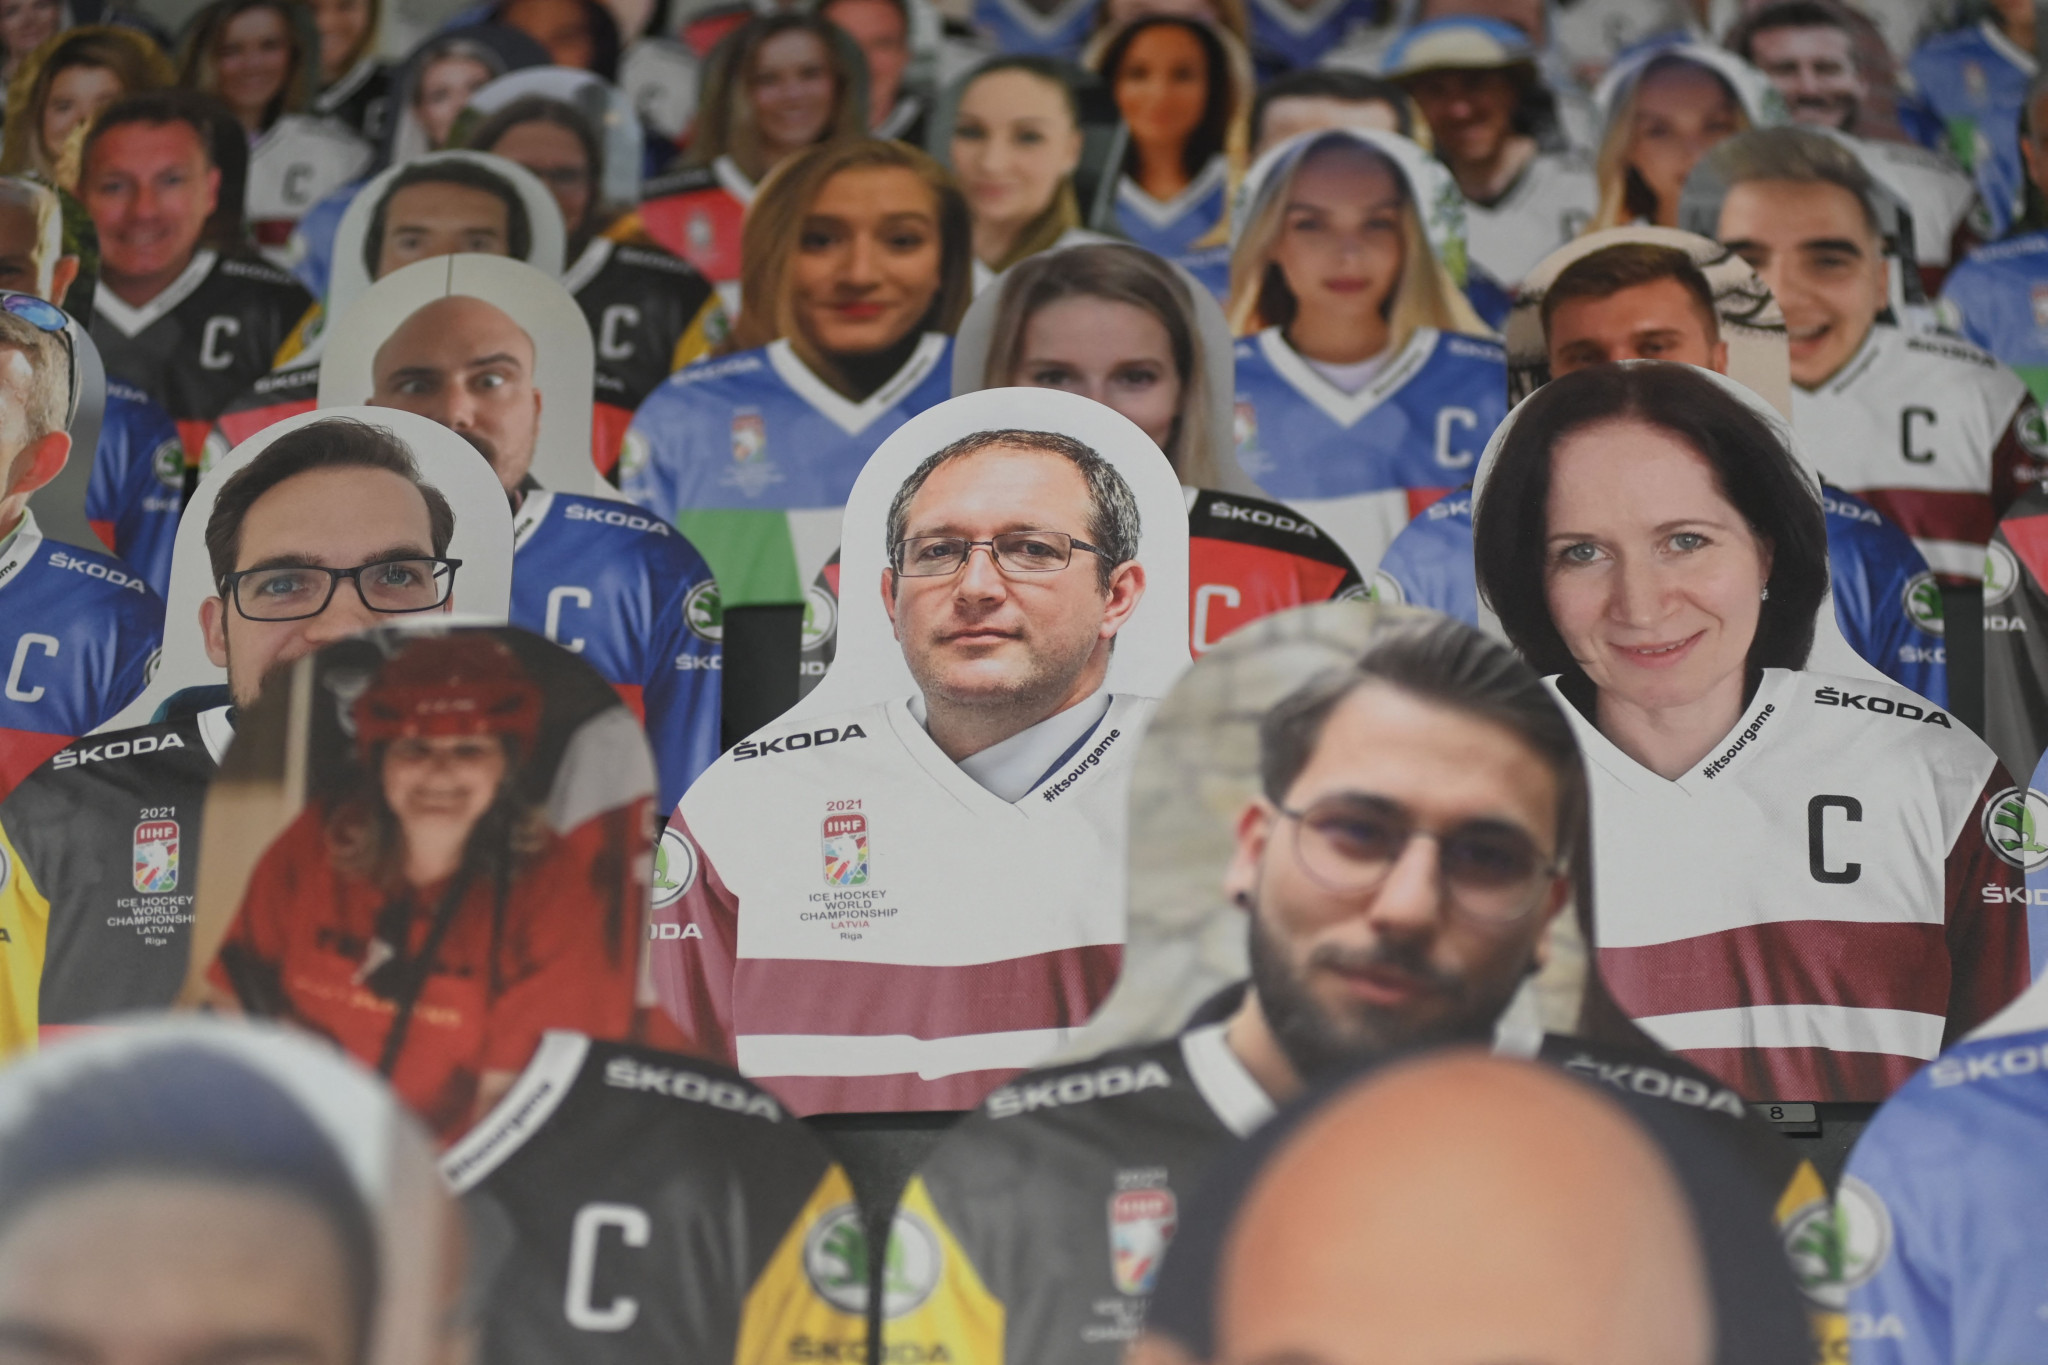 Cardboard cut-outs witnessed Latvia's win over Canada ©Getty Images